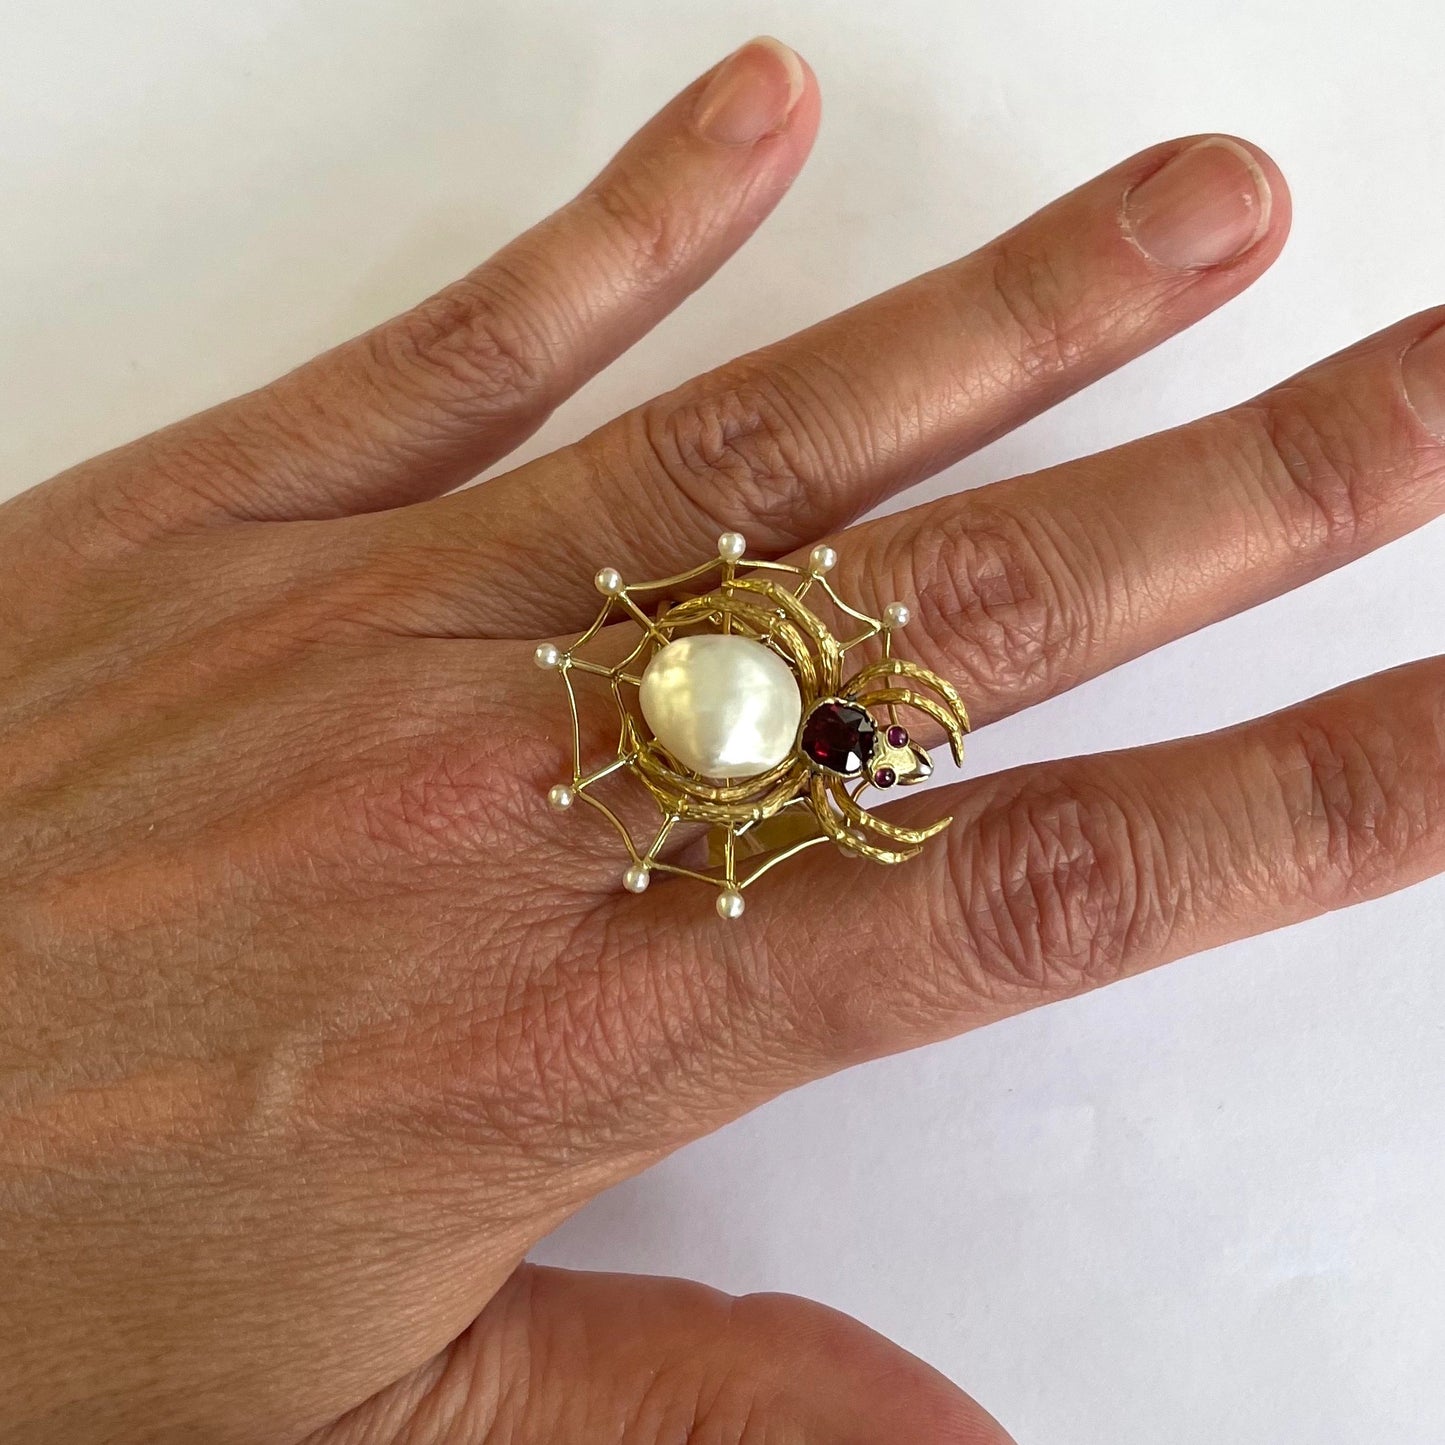 Post-1980s 18KT Yellow Gold Natural Pearl & Garnet Spider Ring on finger